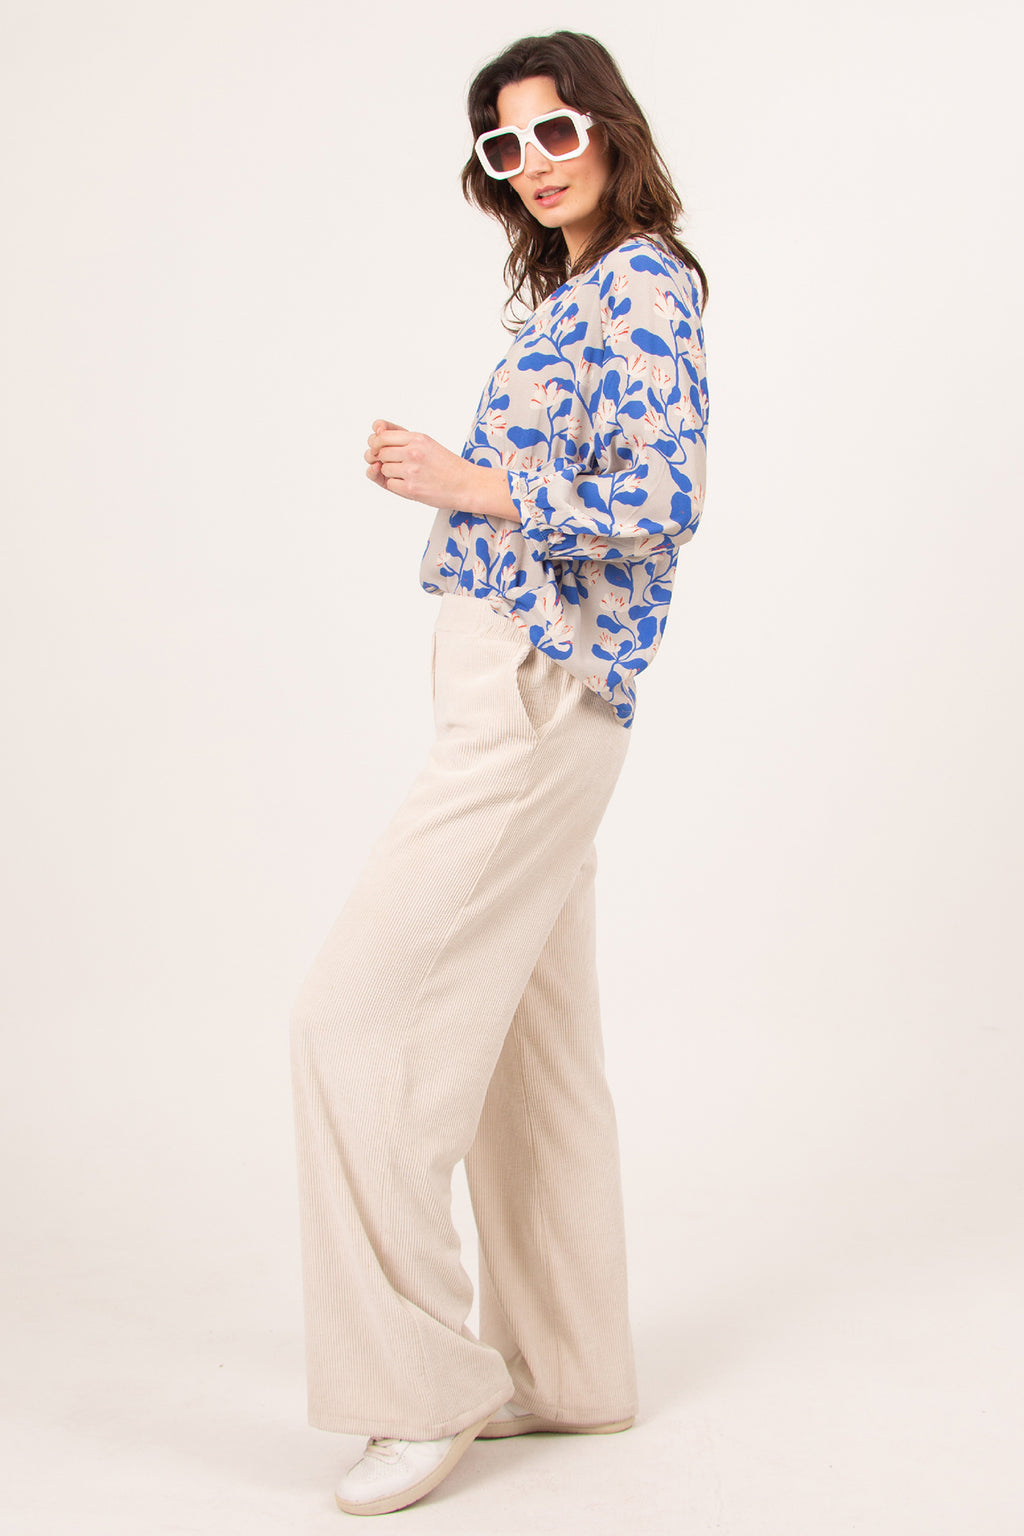 Zus blouse in small white lotus